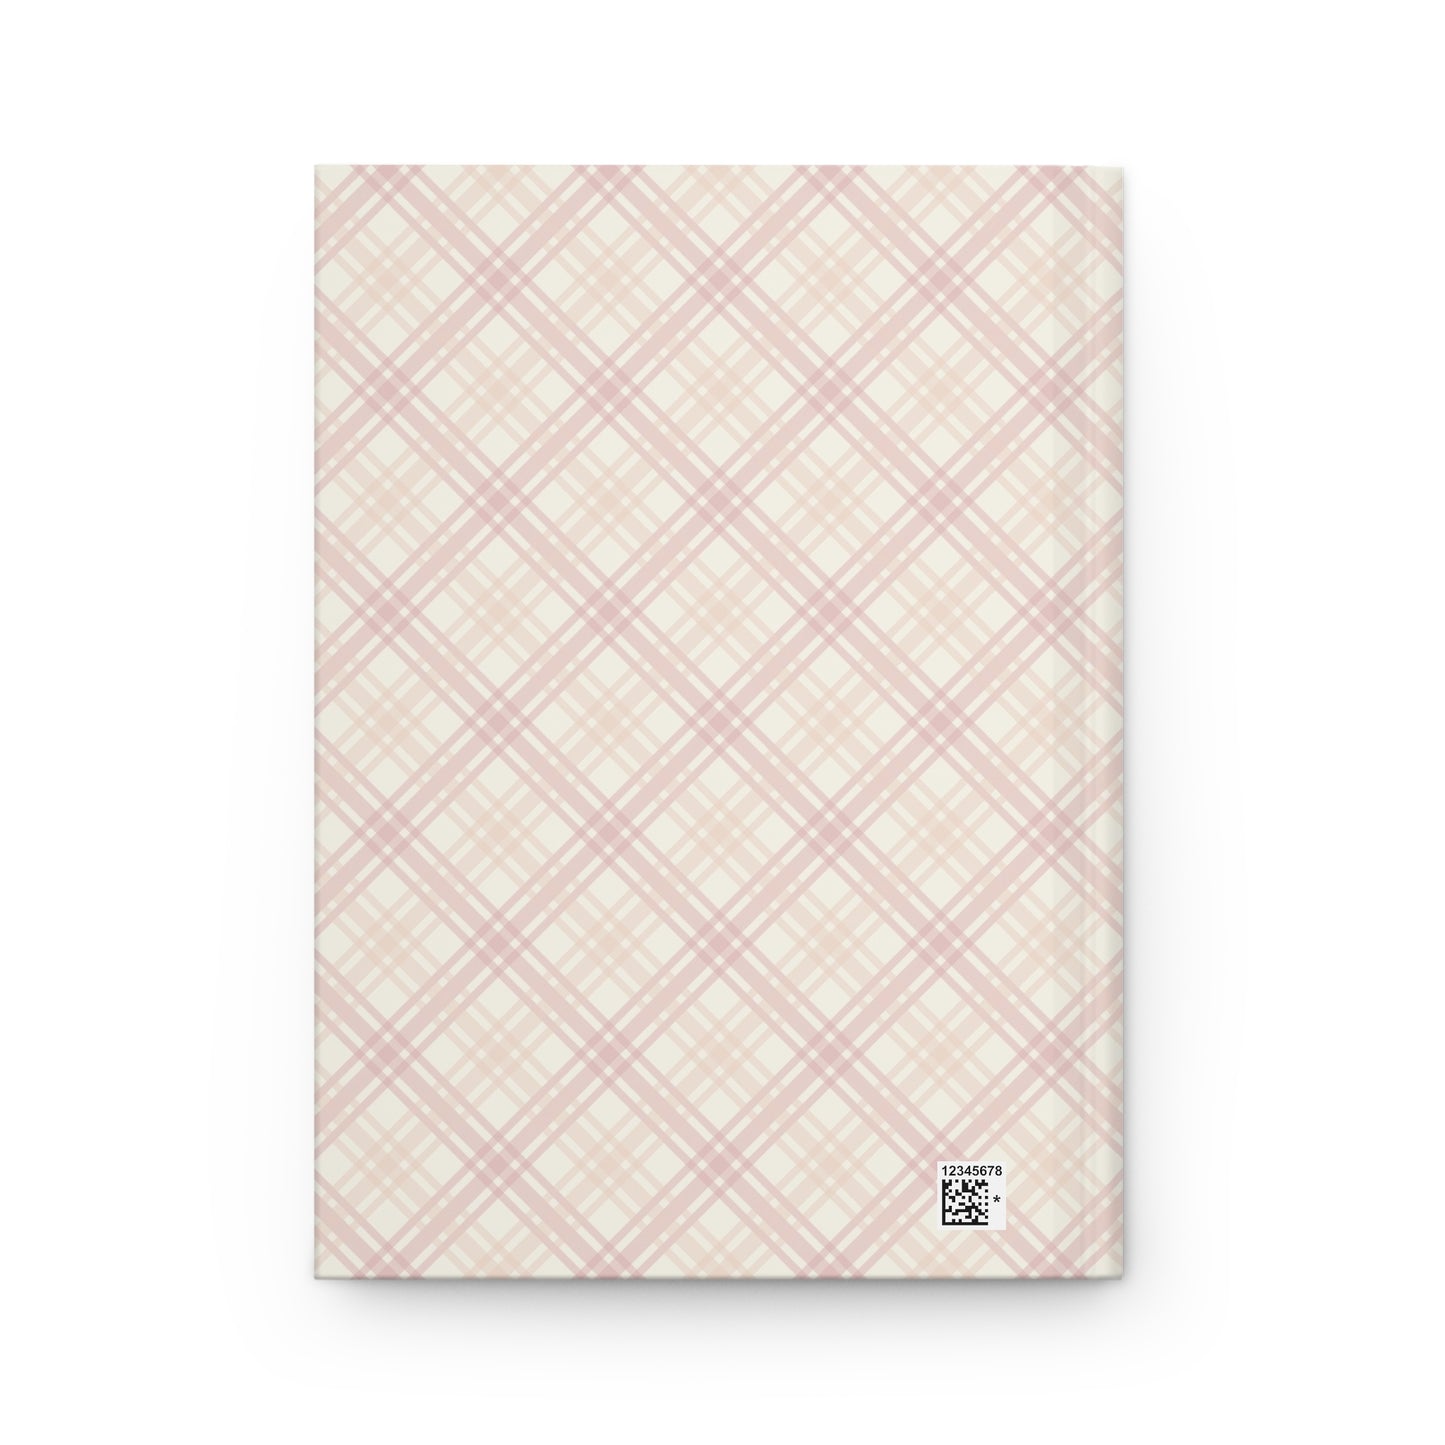 Per My Last Email Hardcover Journal